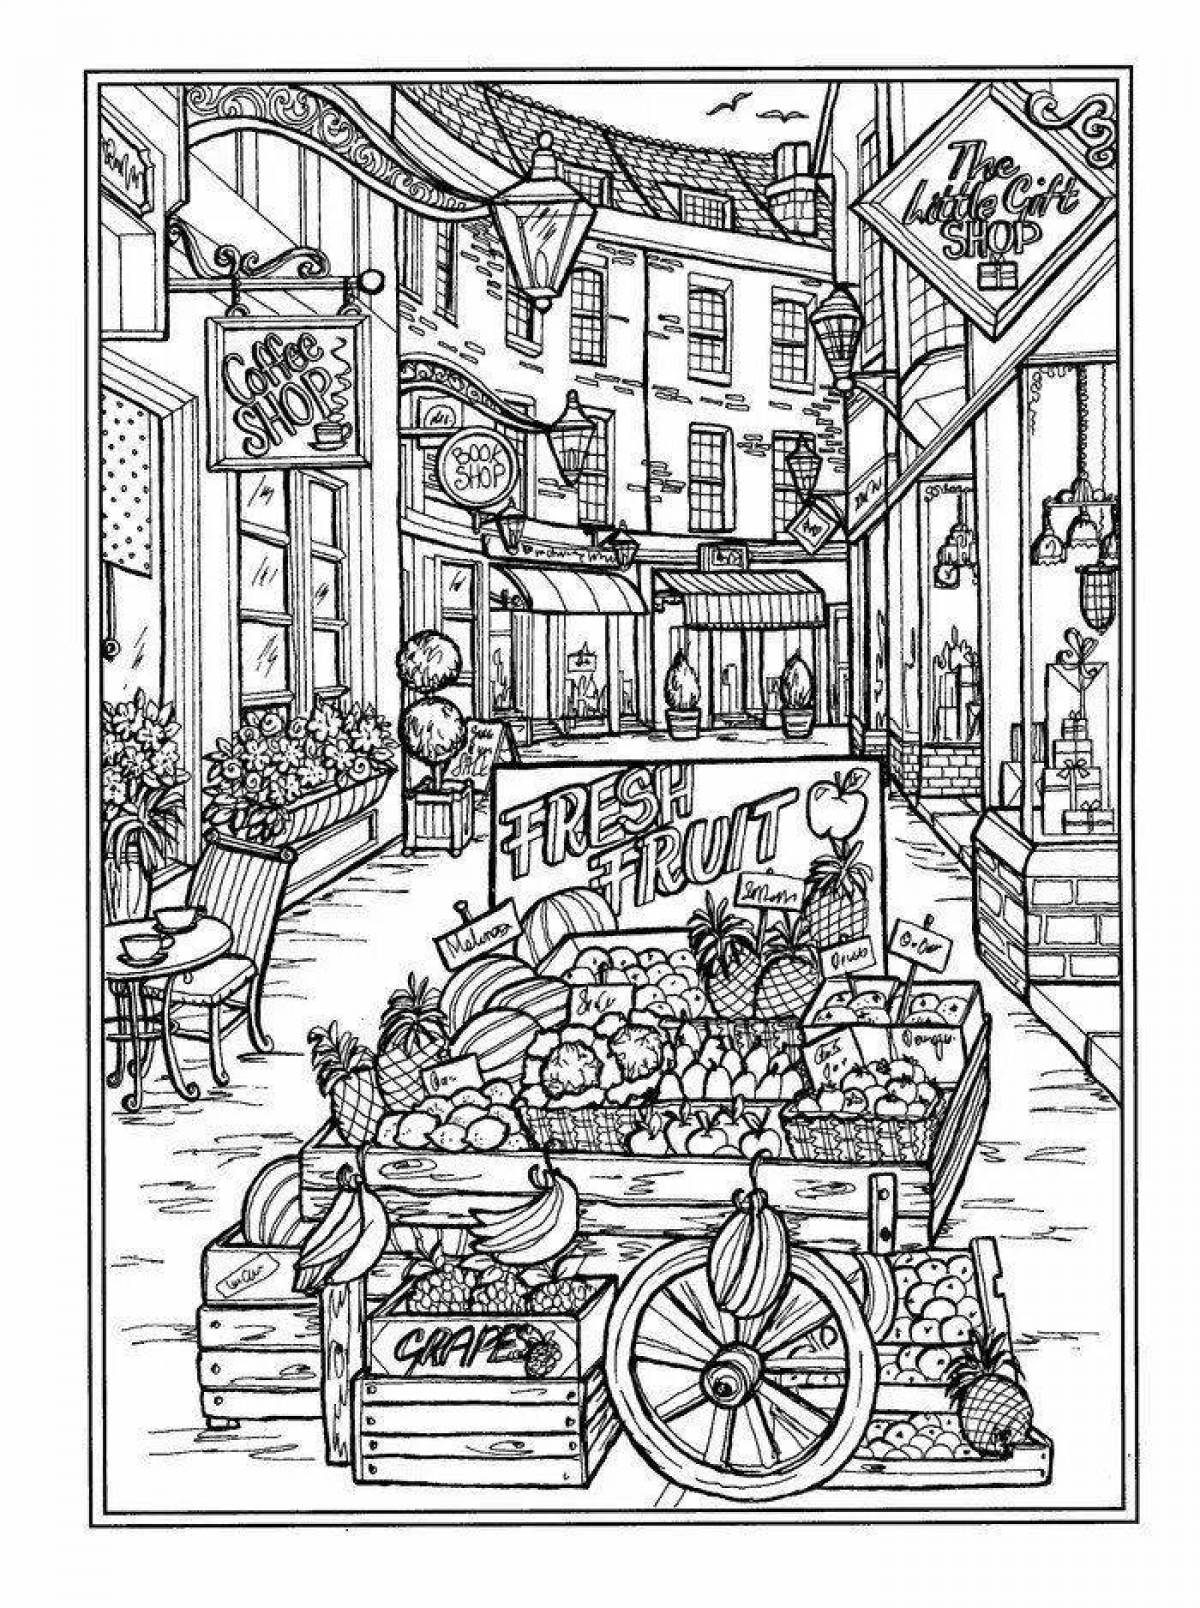 Creative haven coloring page is gorgeous